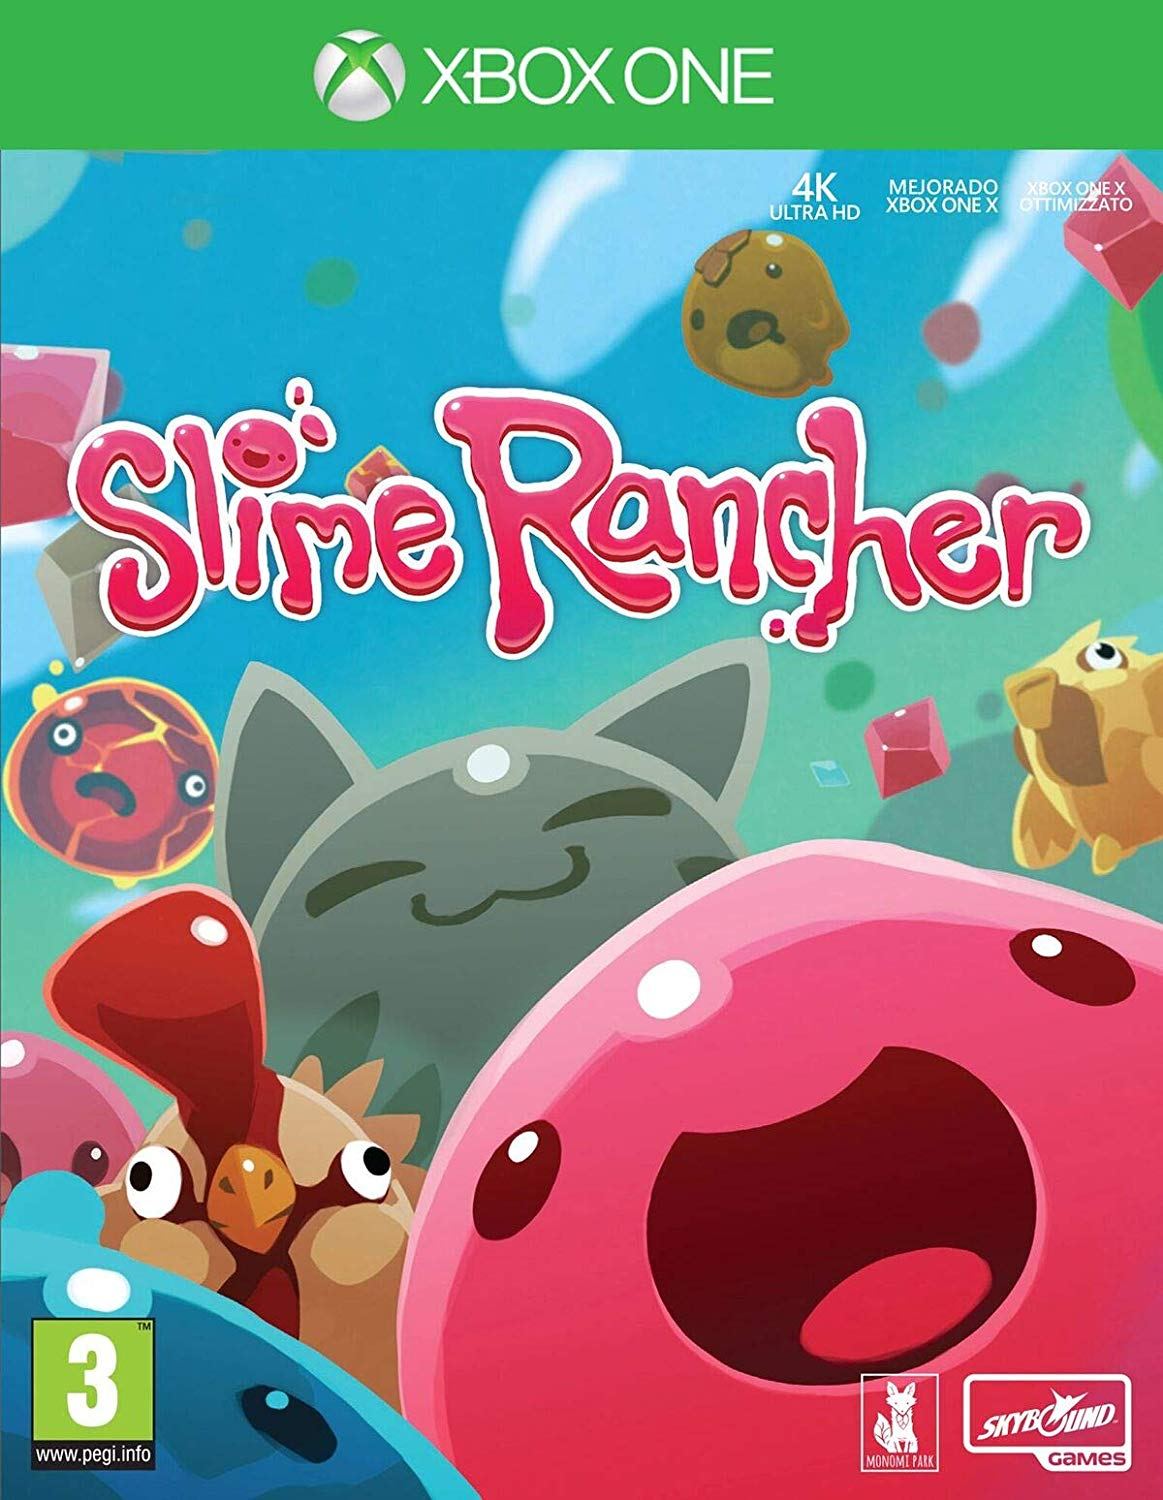 how to play slime rancher multiplayer on xbox one